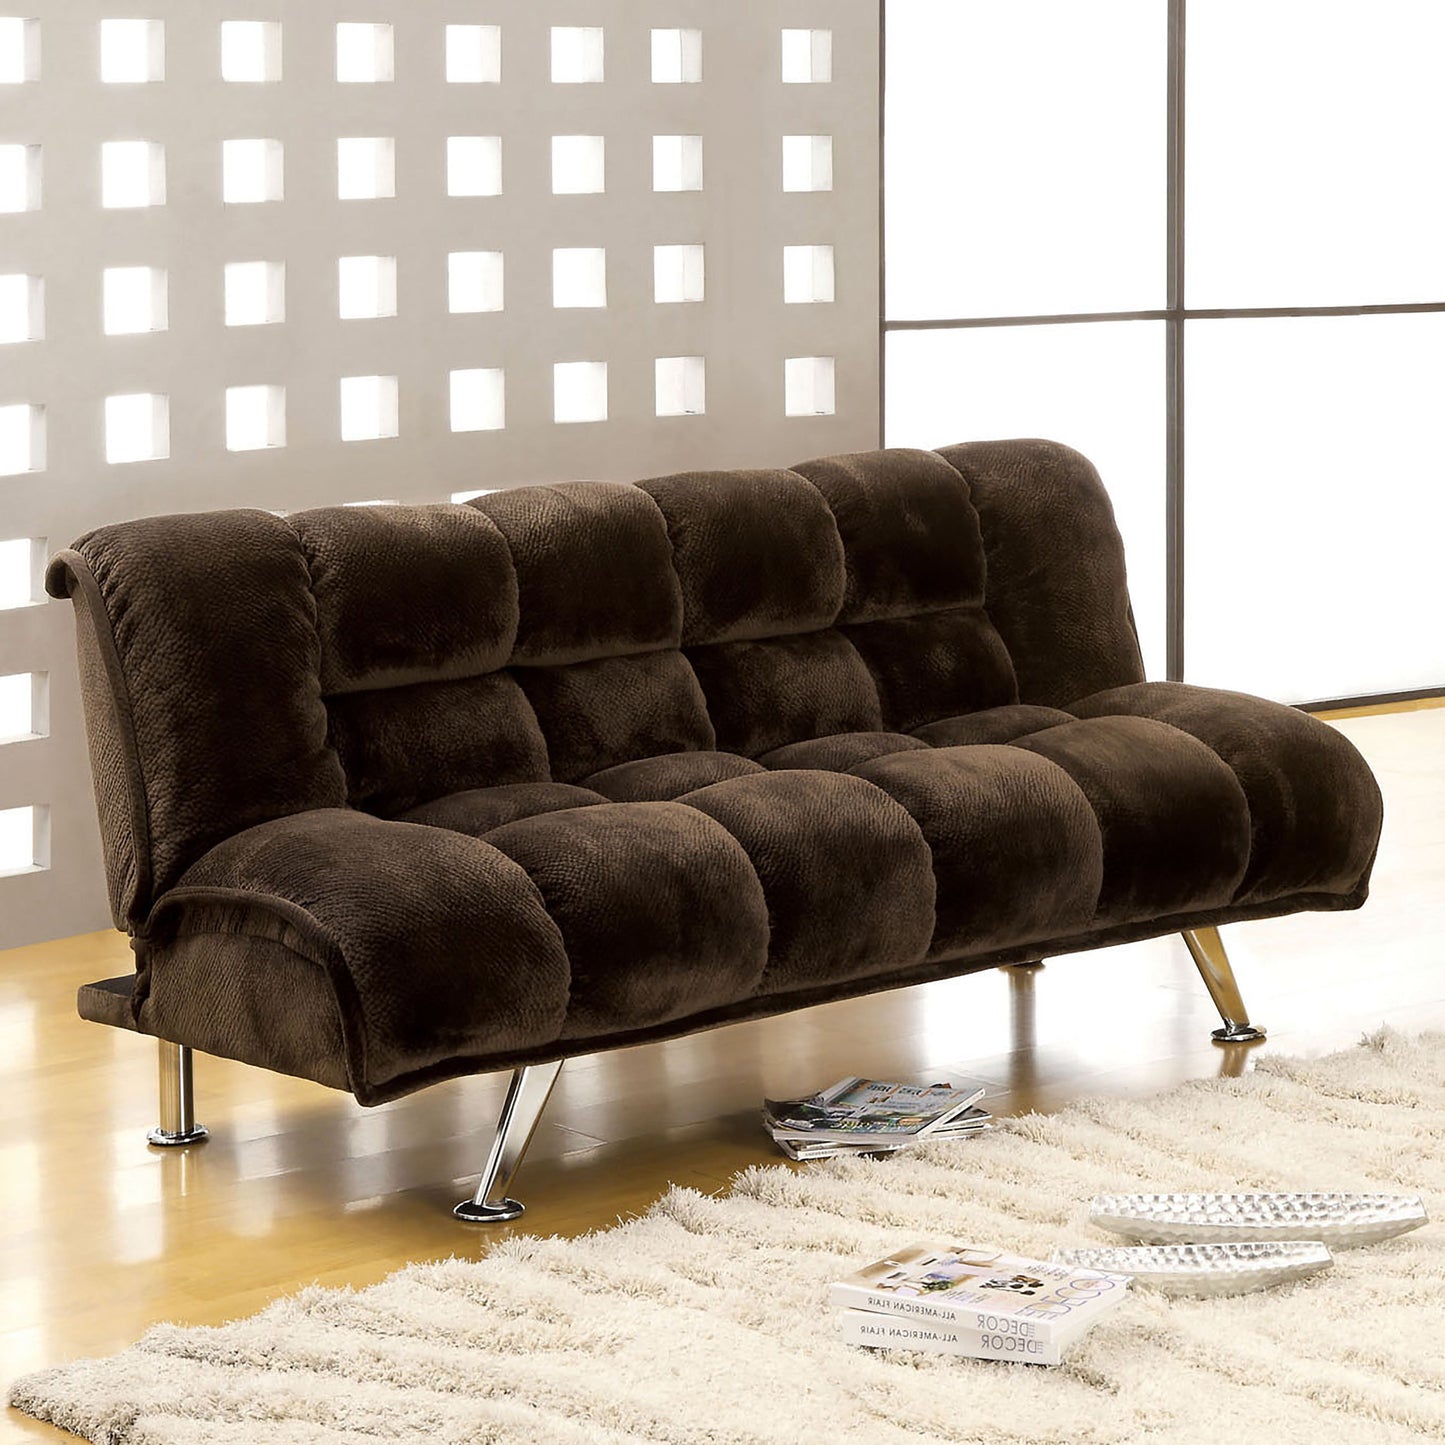 Marbell Contemporary Upholstered Futon in Dark Brown